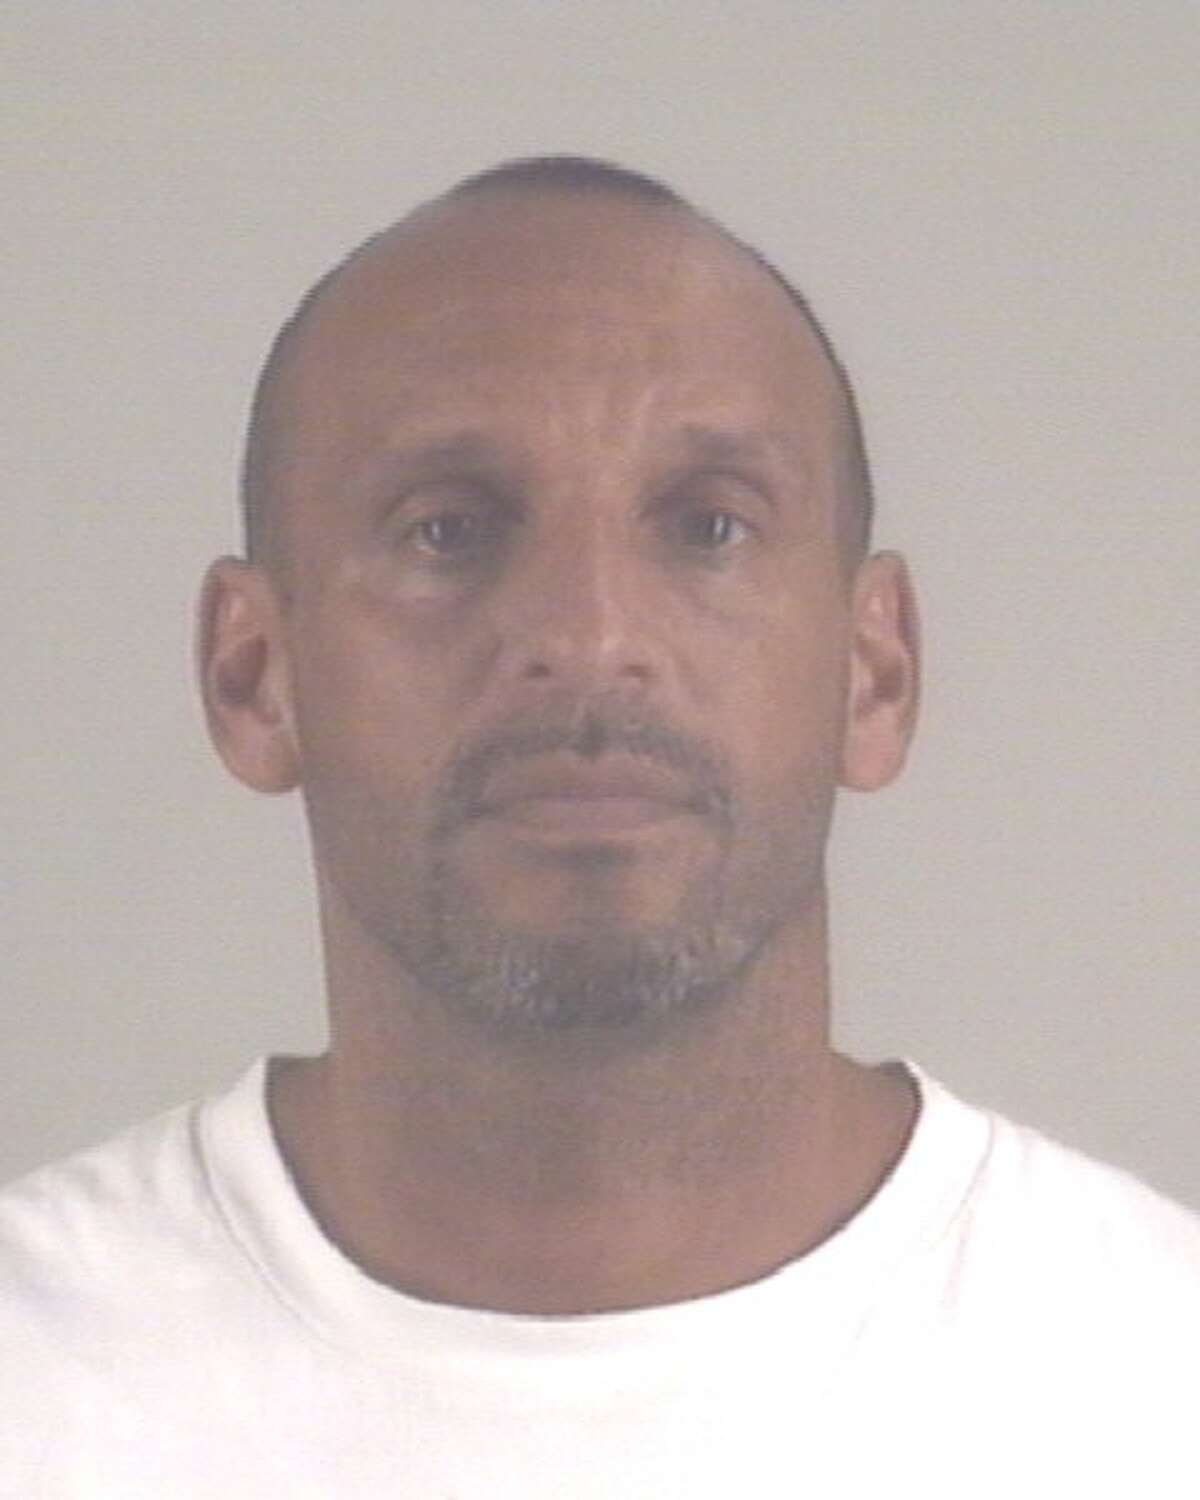 Geronimo Aguilar, a 45-year-old, allegedly repeatedly sexually assaulted two underage girls ages 11 and 13 at the time, during the 1990s when Aguilar and his wife lived with the two sisters and their parents in Fort Worth and Grapevine, the Fort Worth Star-Telegram reported. A Tarrant County grand jury indicted Aguilar in 2014 on two counts of aggravated sexual assault of a child, three counts of sexual assault of a child under 17 and three counts of indecency with a child.